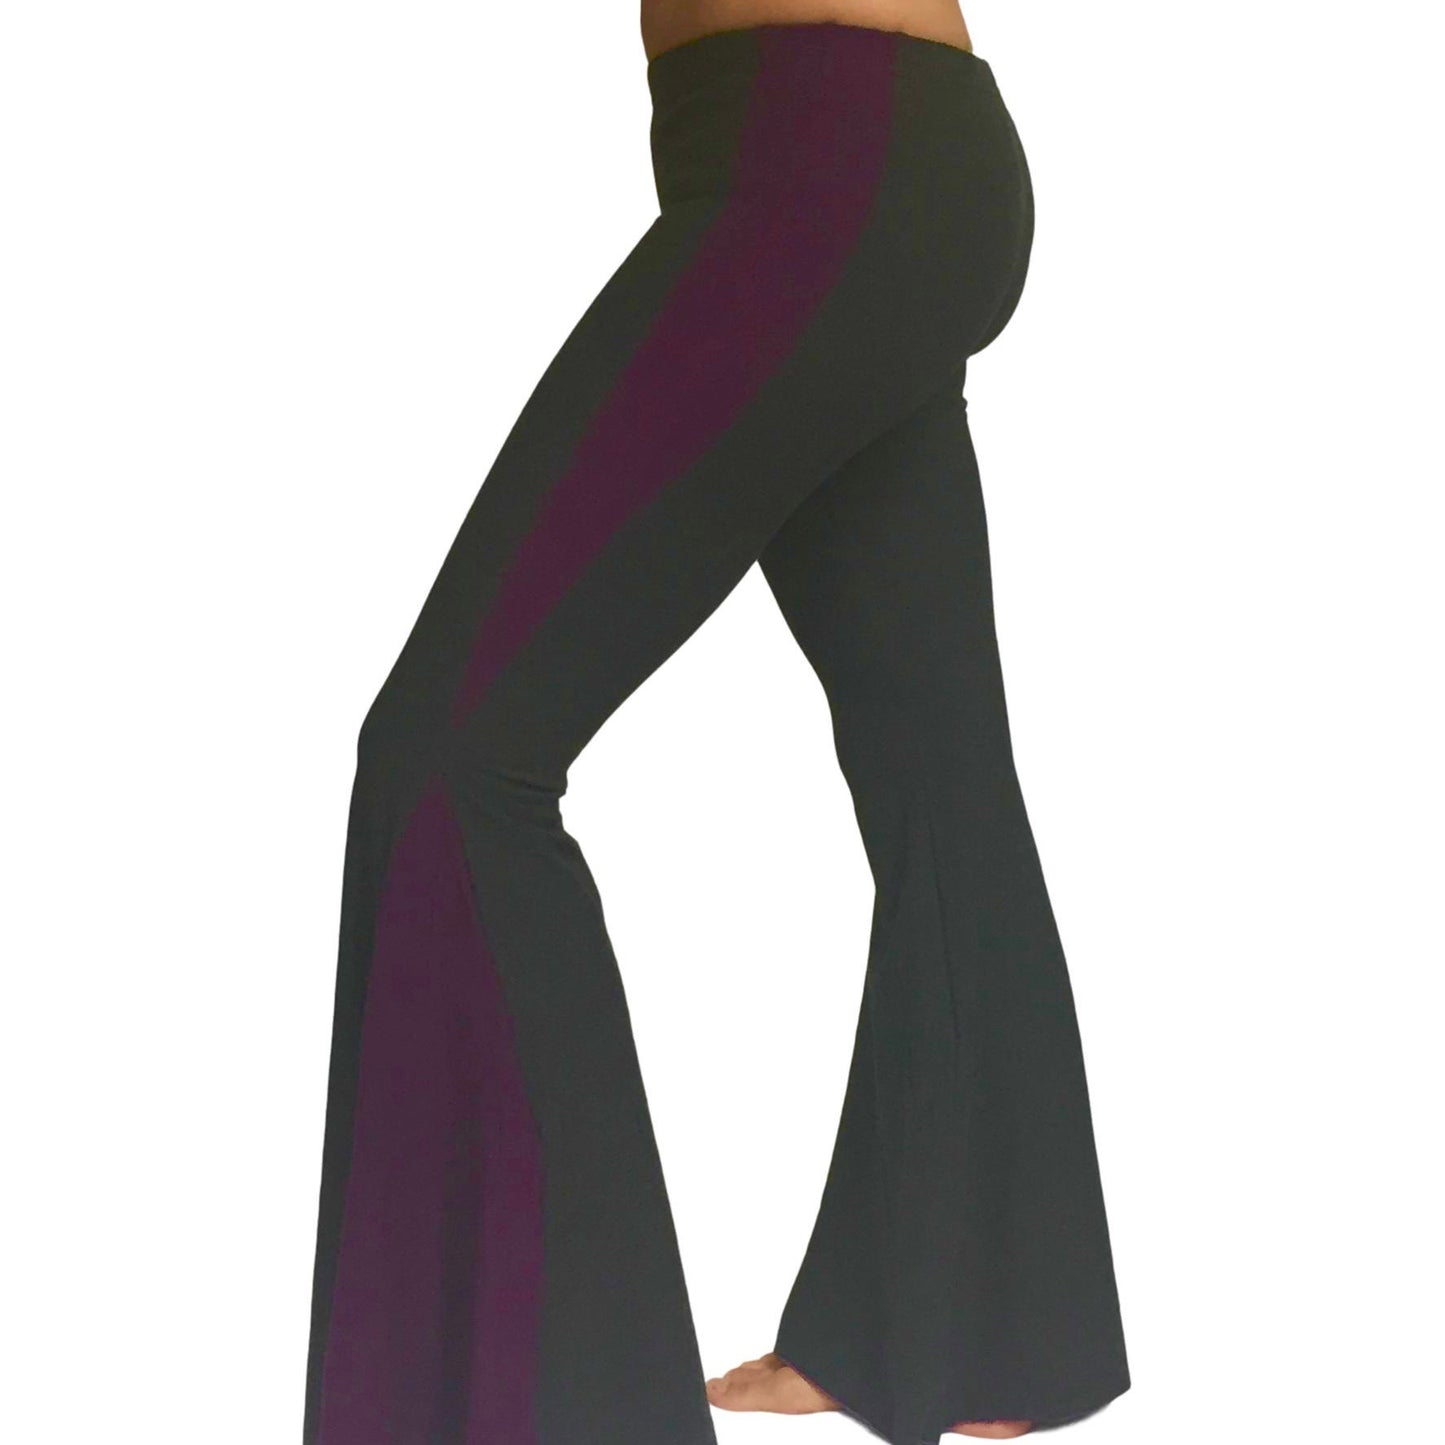 Gaia Pants - Color Combo of your choice